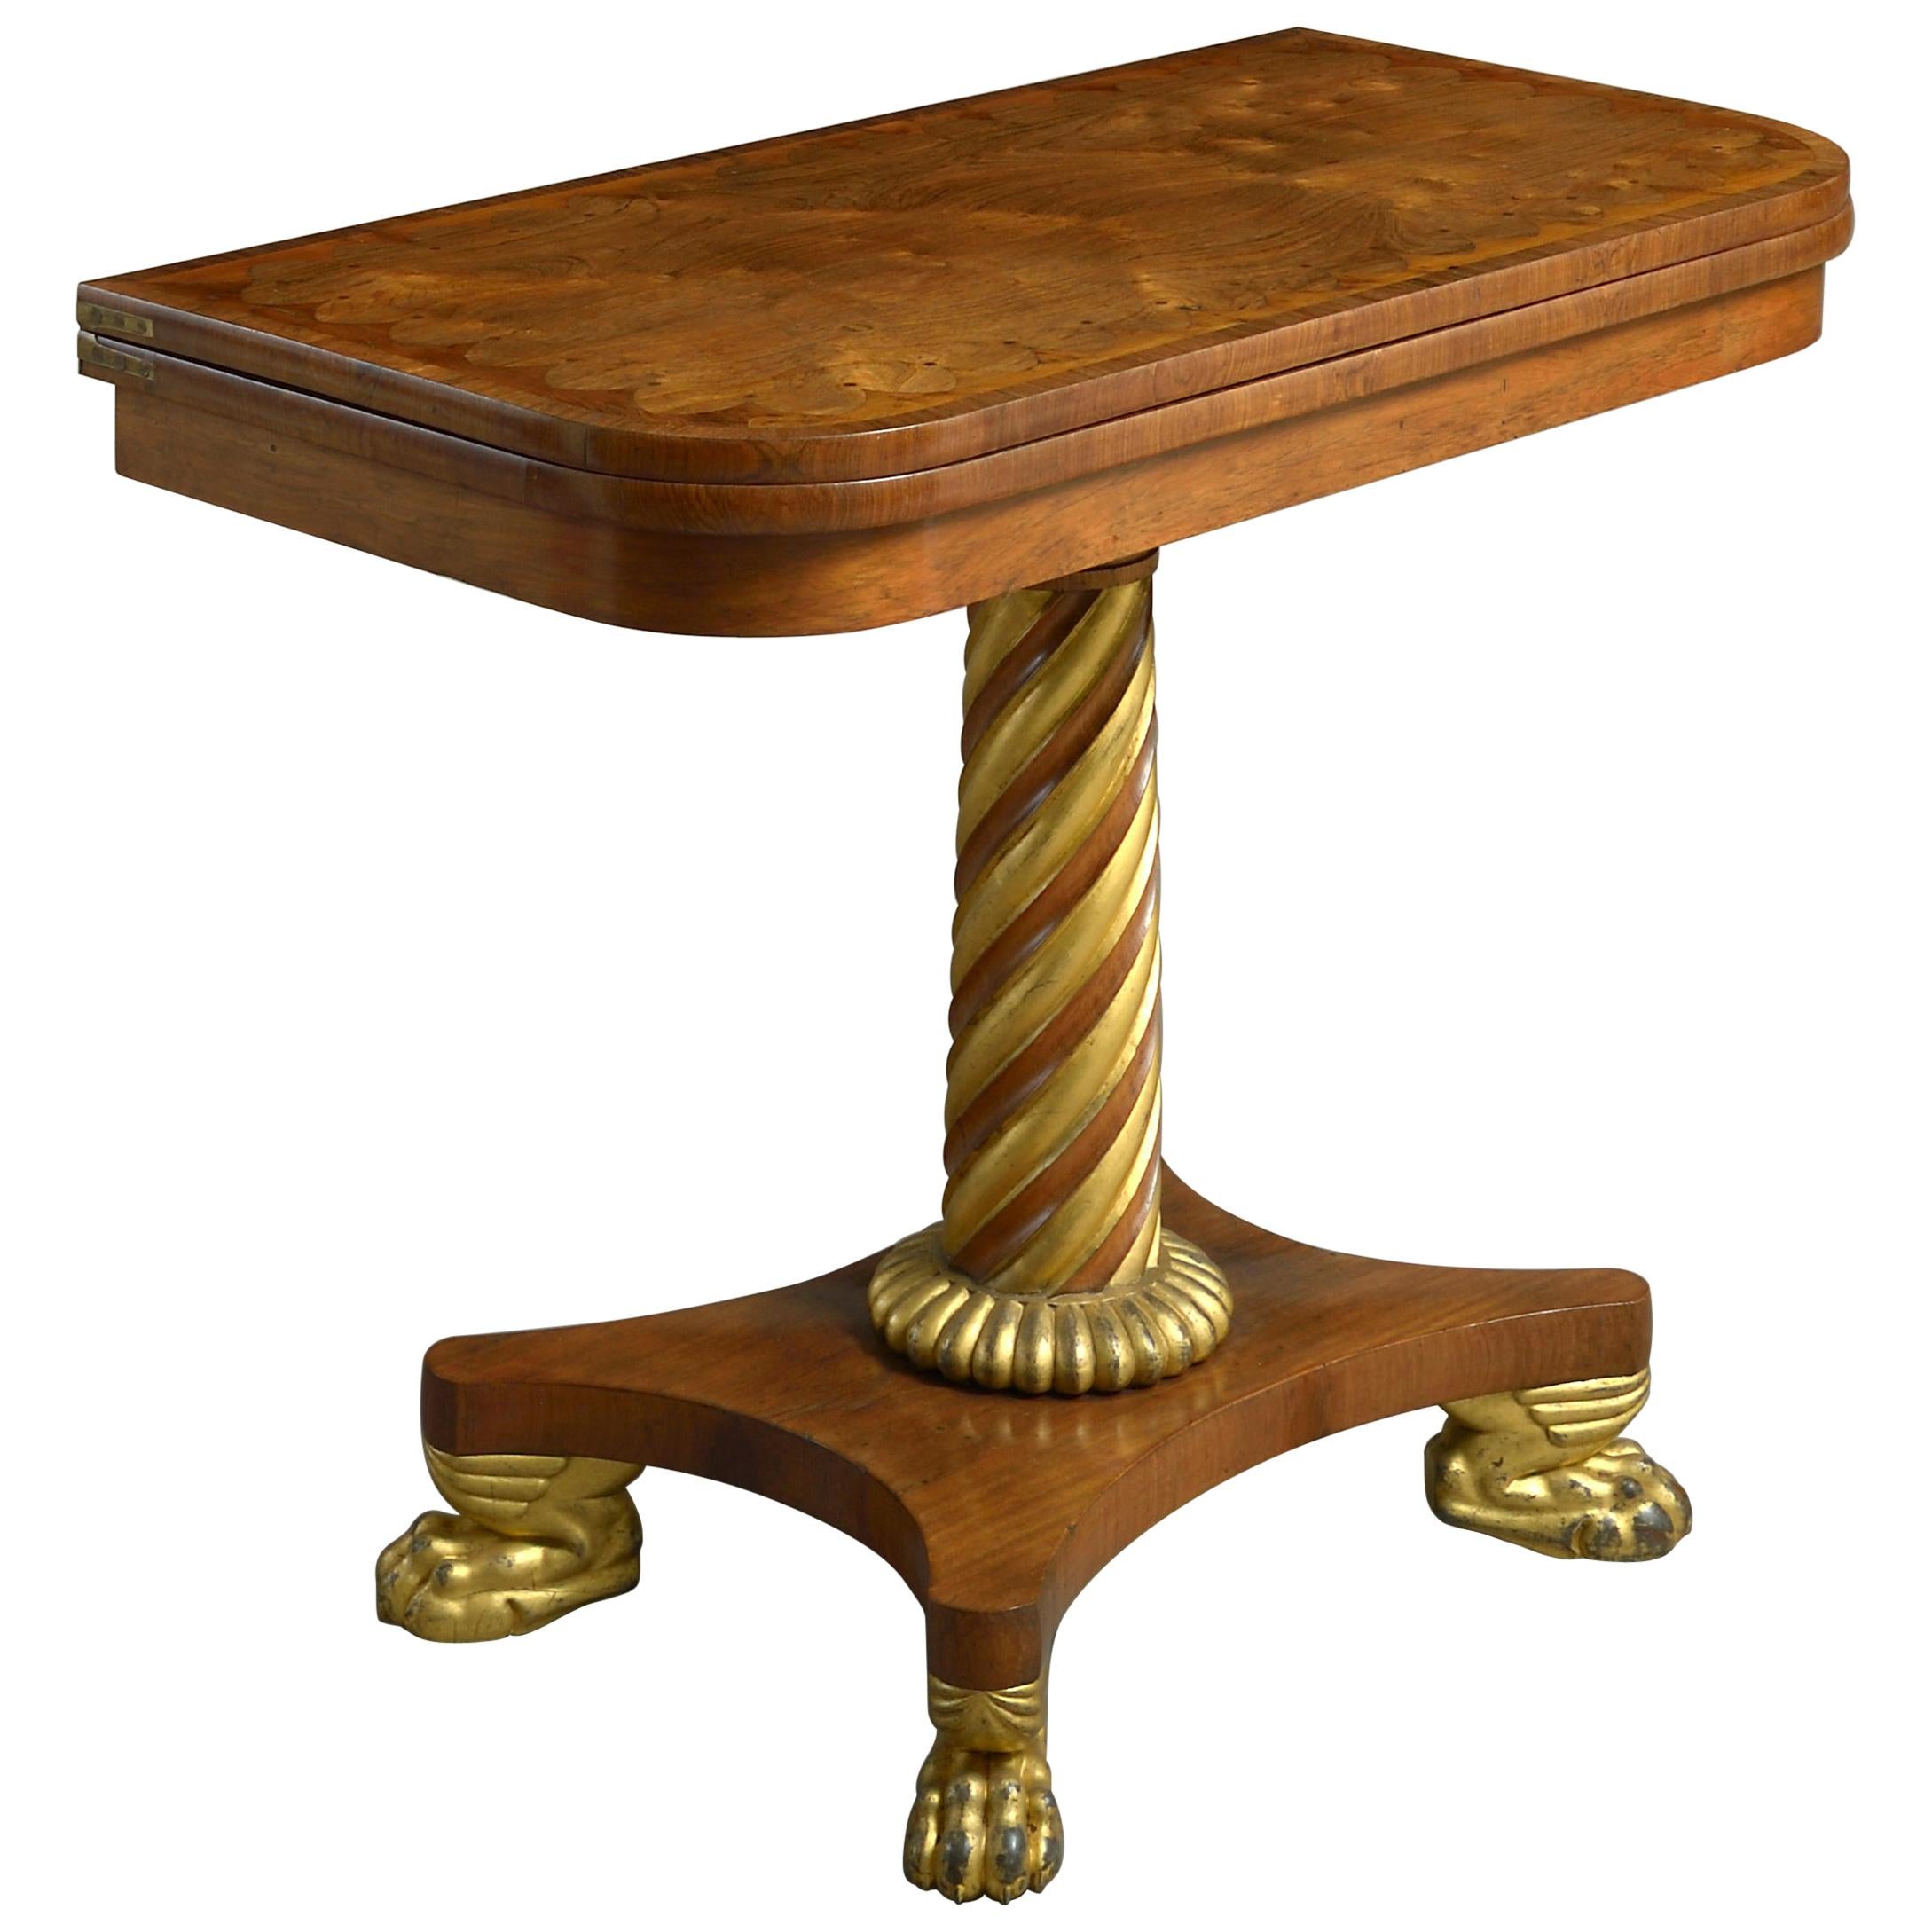 Pair of Regency Rosewood and Parcel-Gilt Card Tables